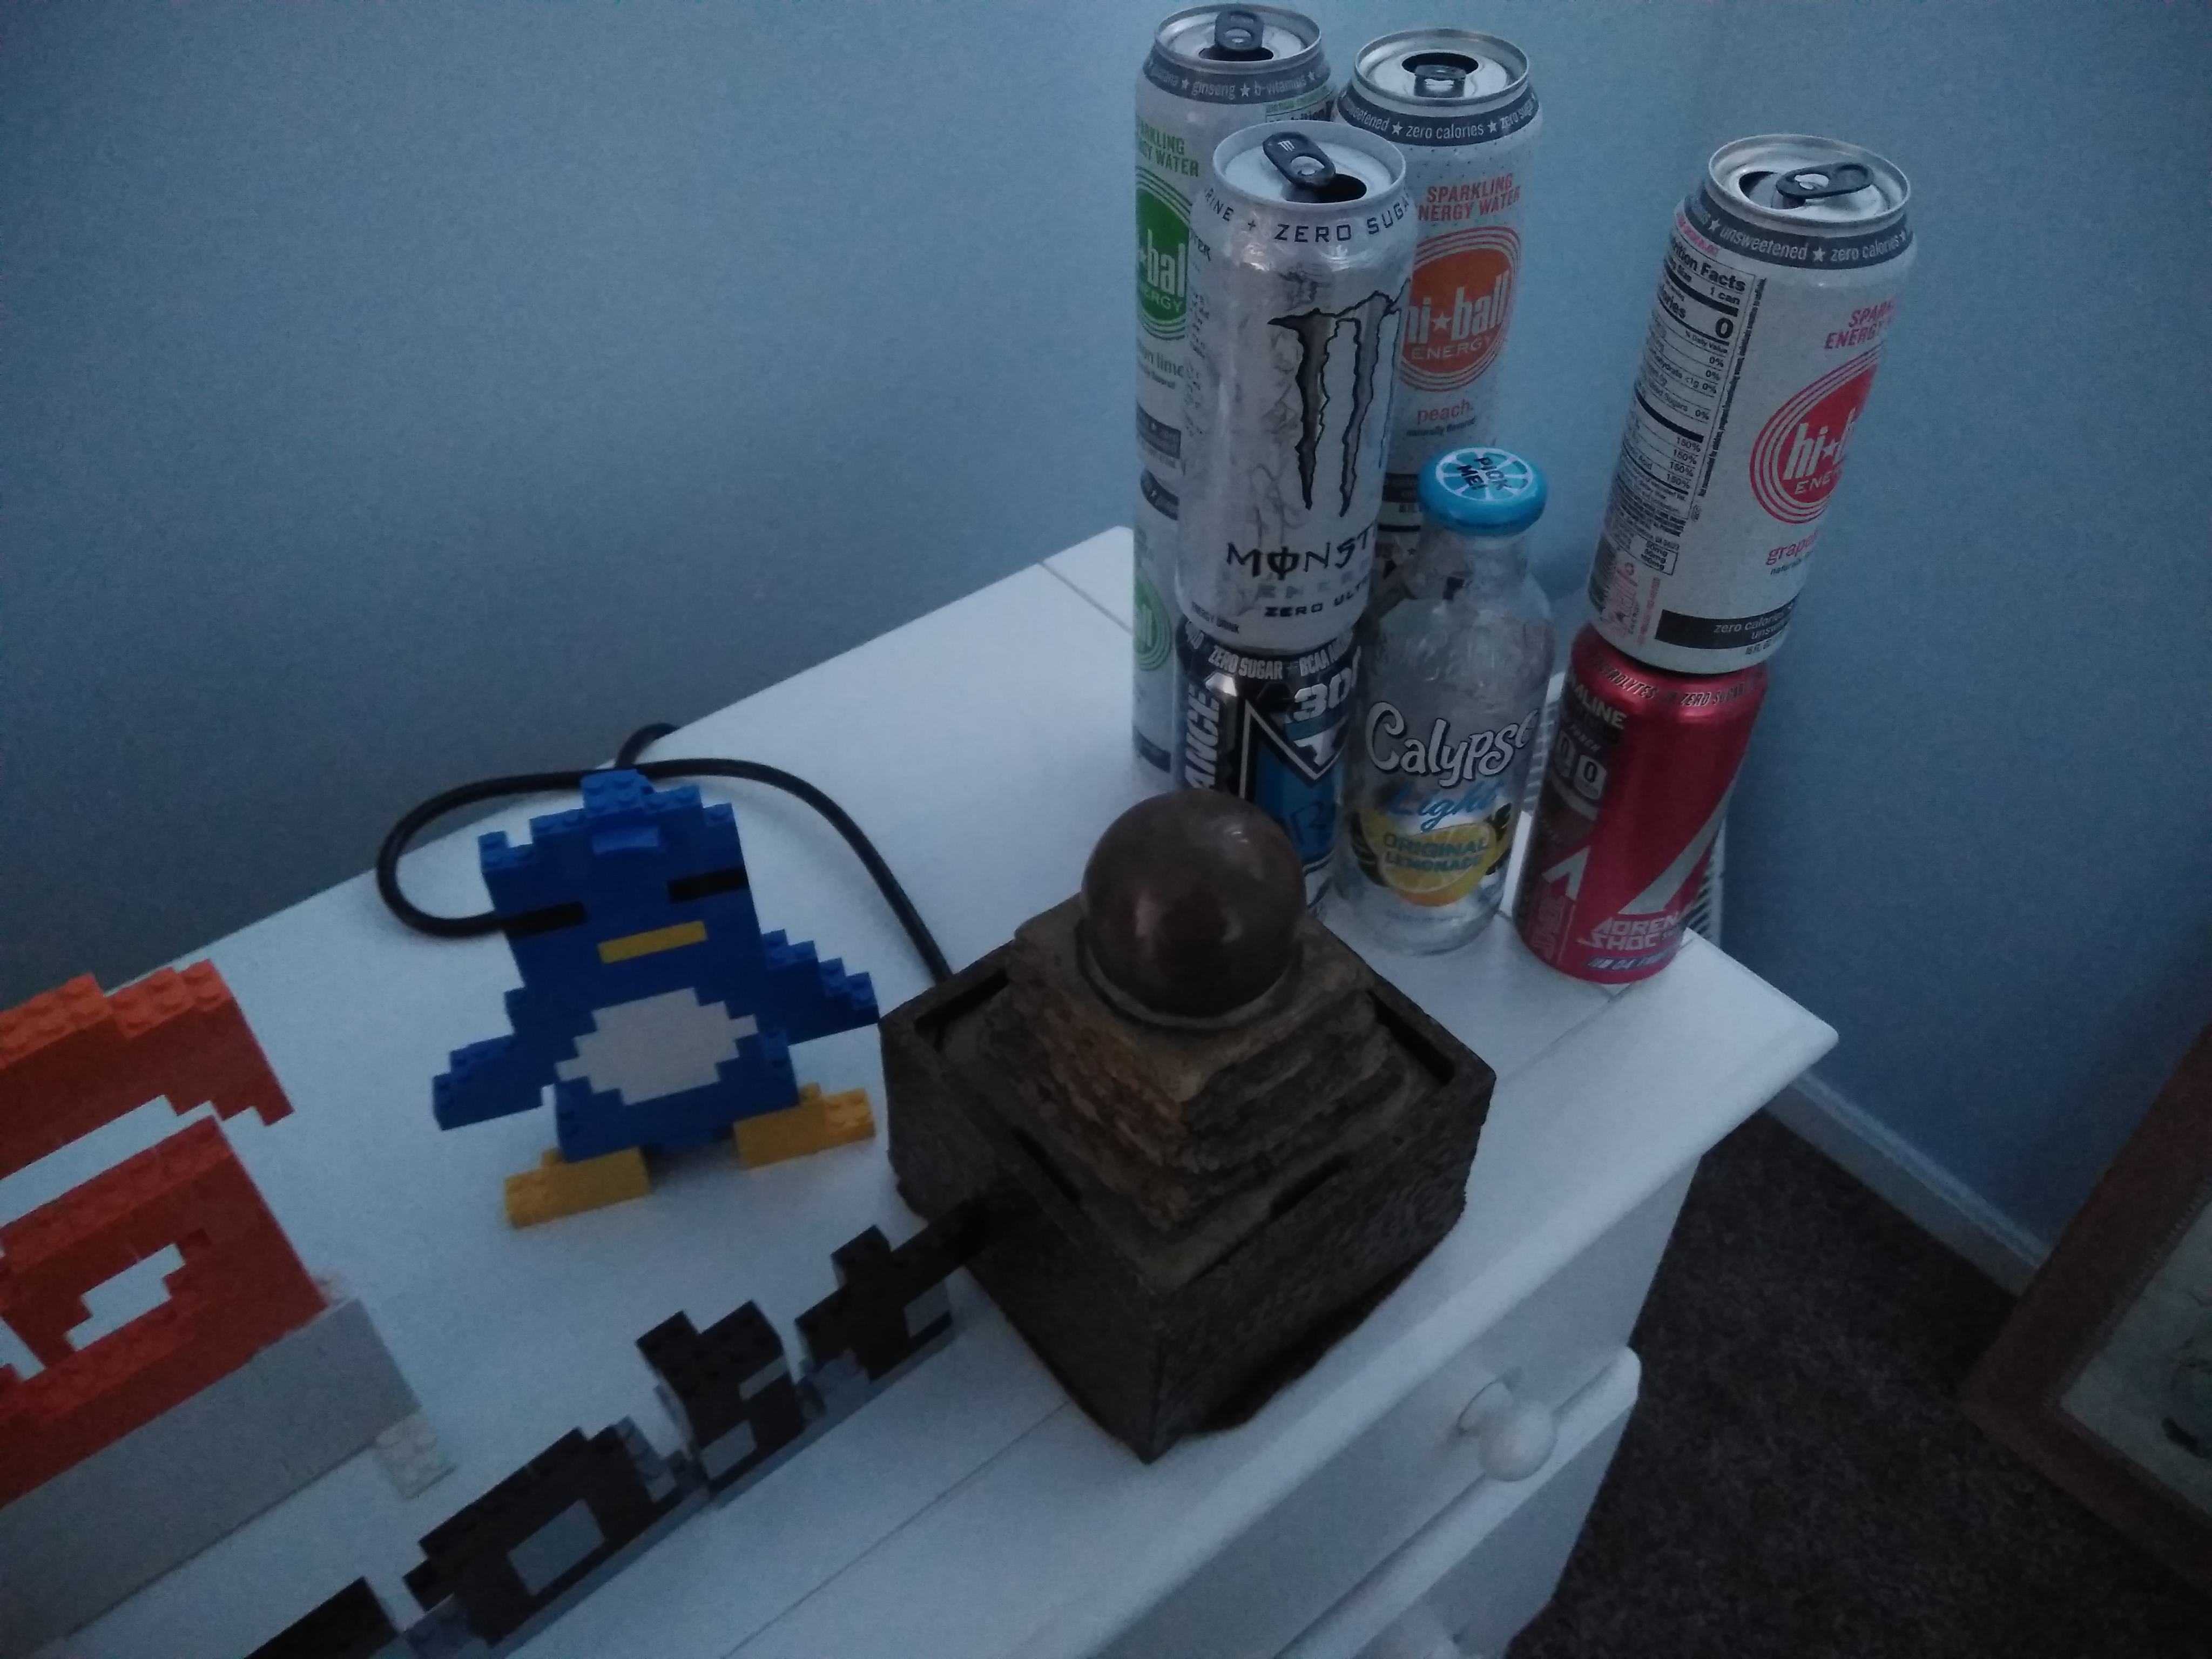 Update March 28 2021: Recently got a Spinning Sphere fountain for my room. Next to my cans of drinks and half hazardeded lego art. makes the room a slight 7% more hotel atrium with indoor streaming water fishpound vibe.